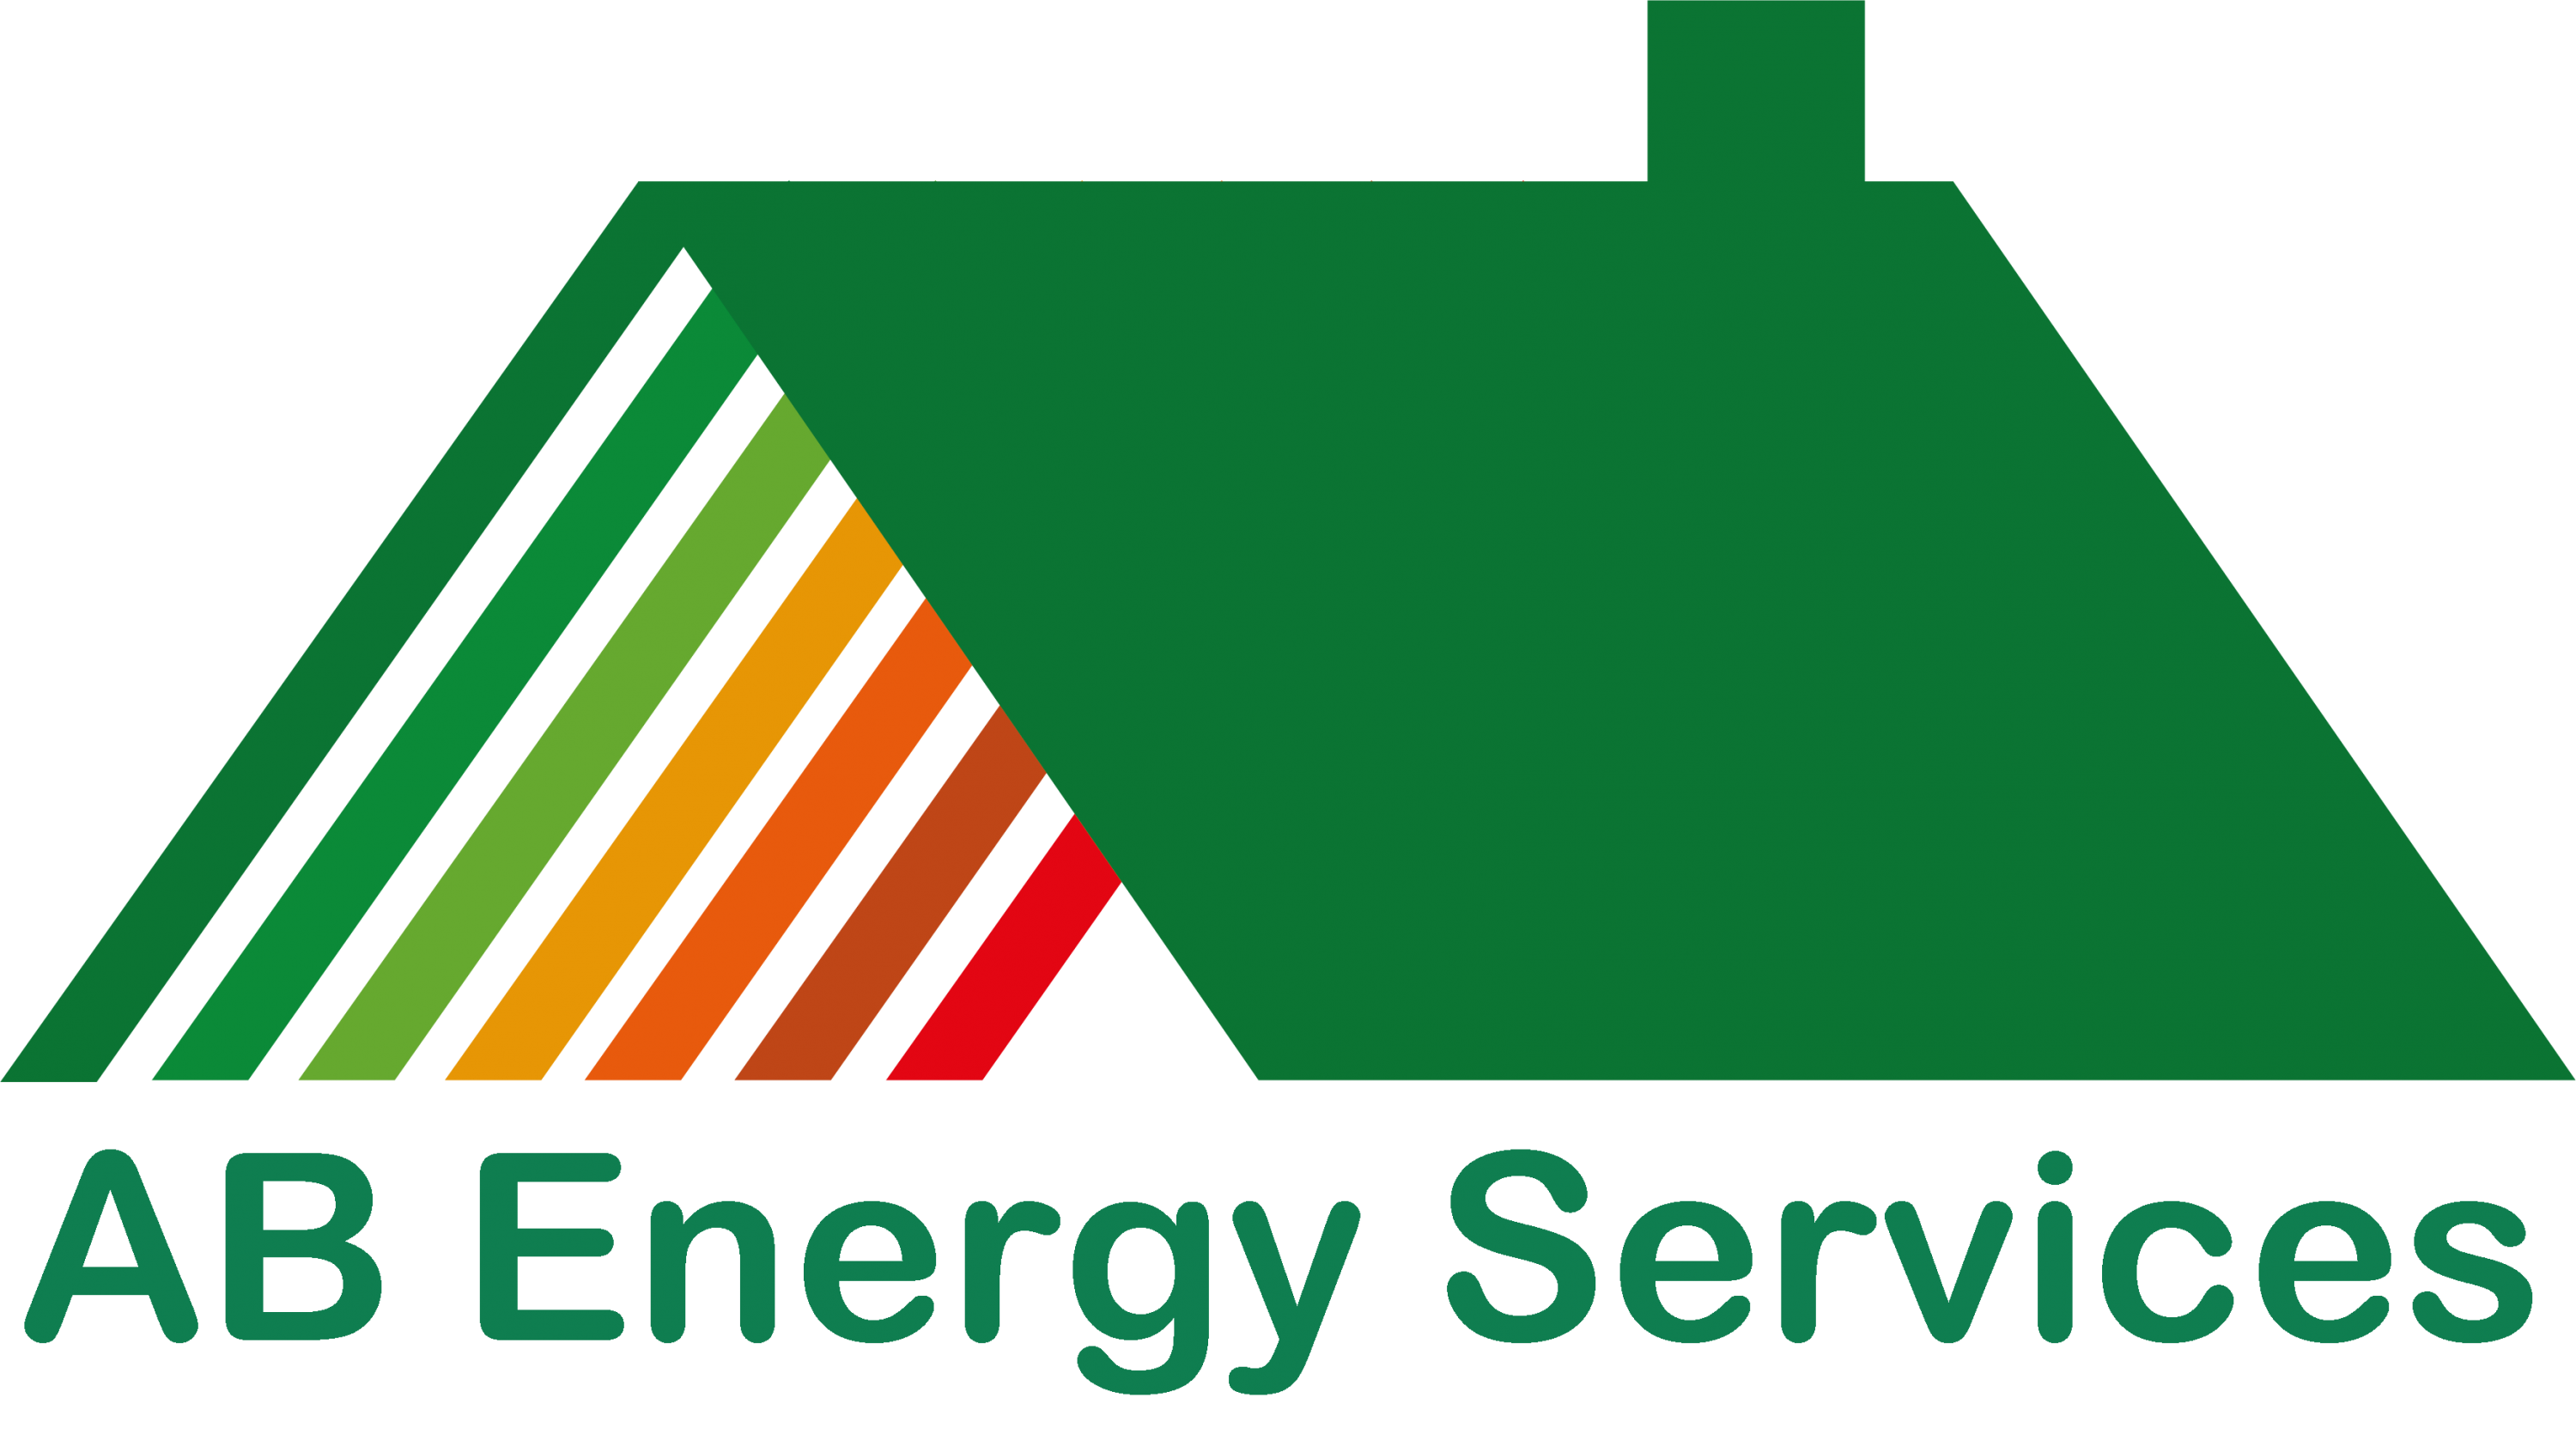 AB Energy Services